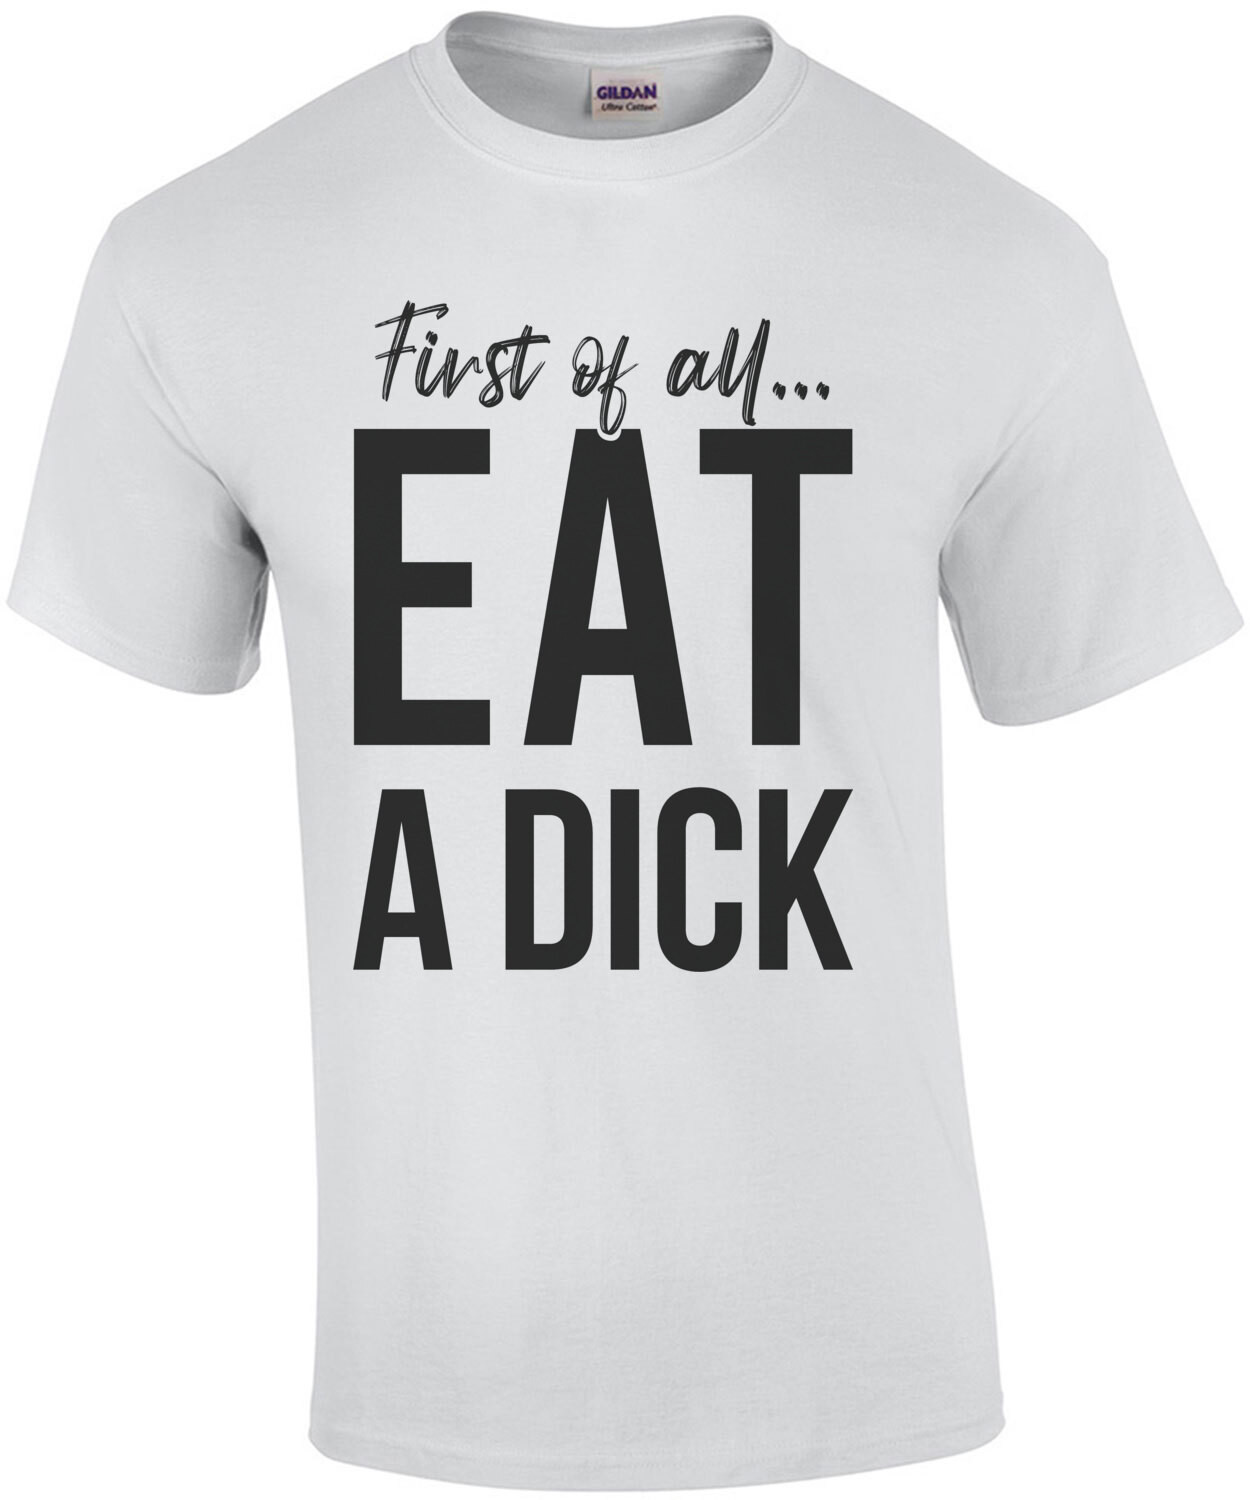 First of all... eat a dick - funny insult t-shirt